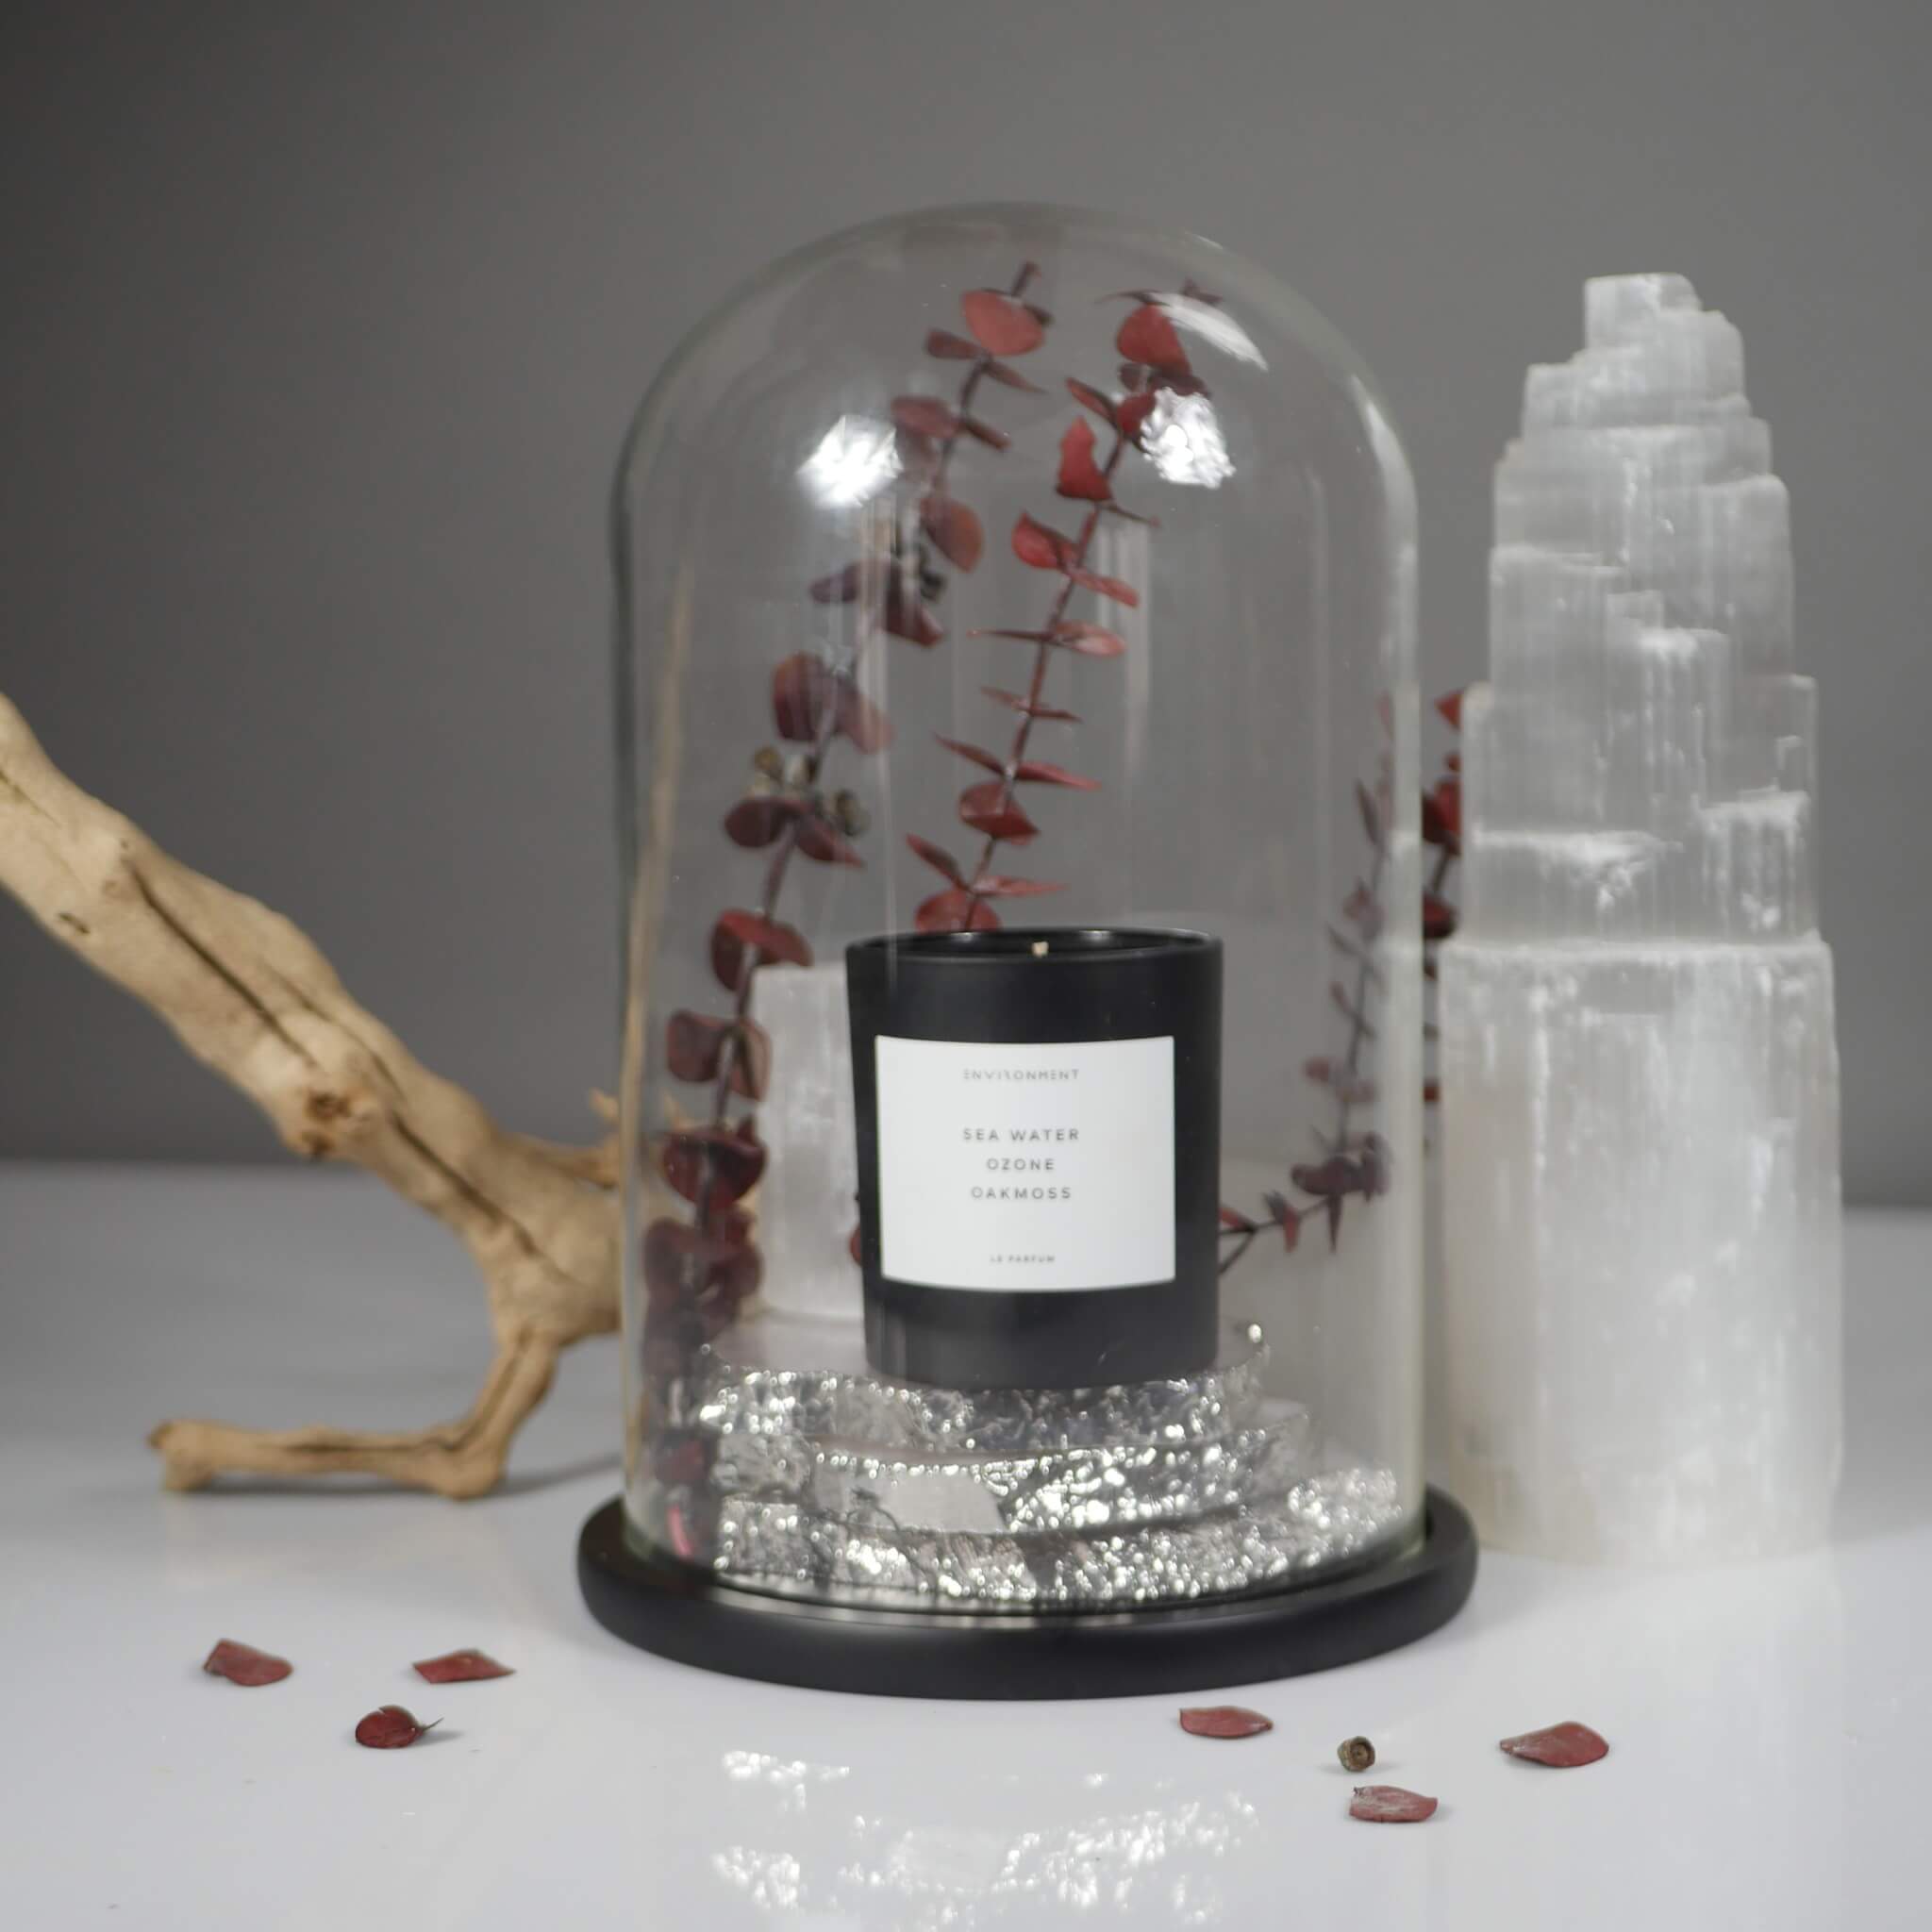 8oz Damask Rose | Vetiver | Guaiac Wood Candle with Lid and Box (Inspired by Le Labo Rose 31® and Fairmont Hotel®)